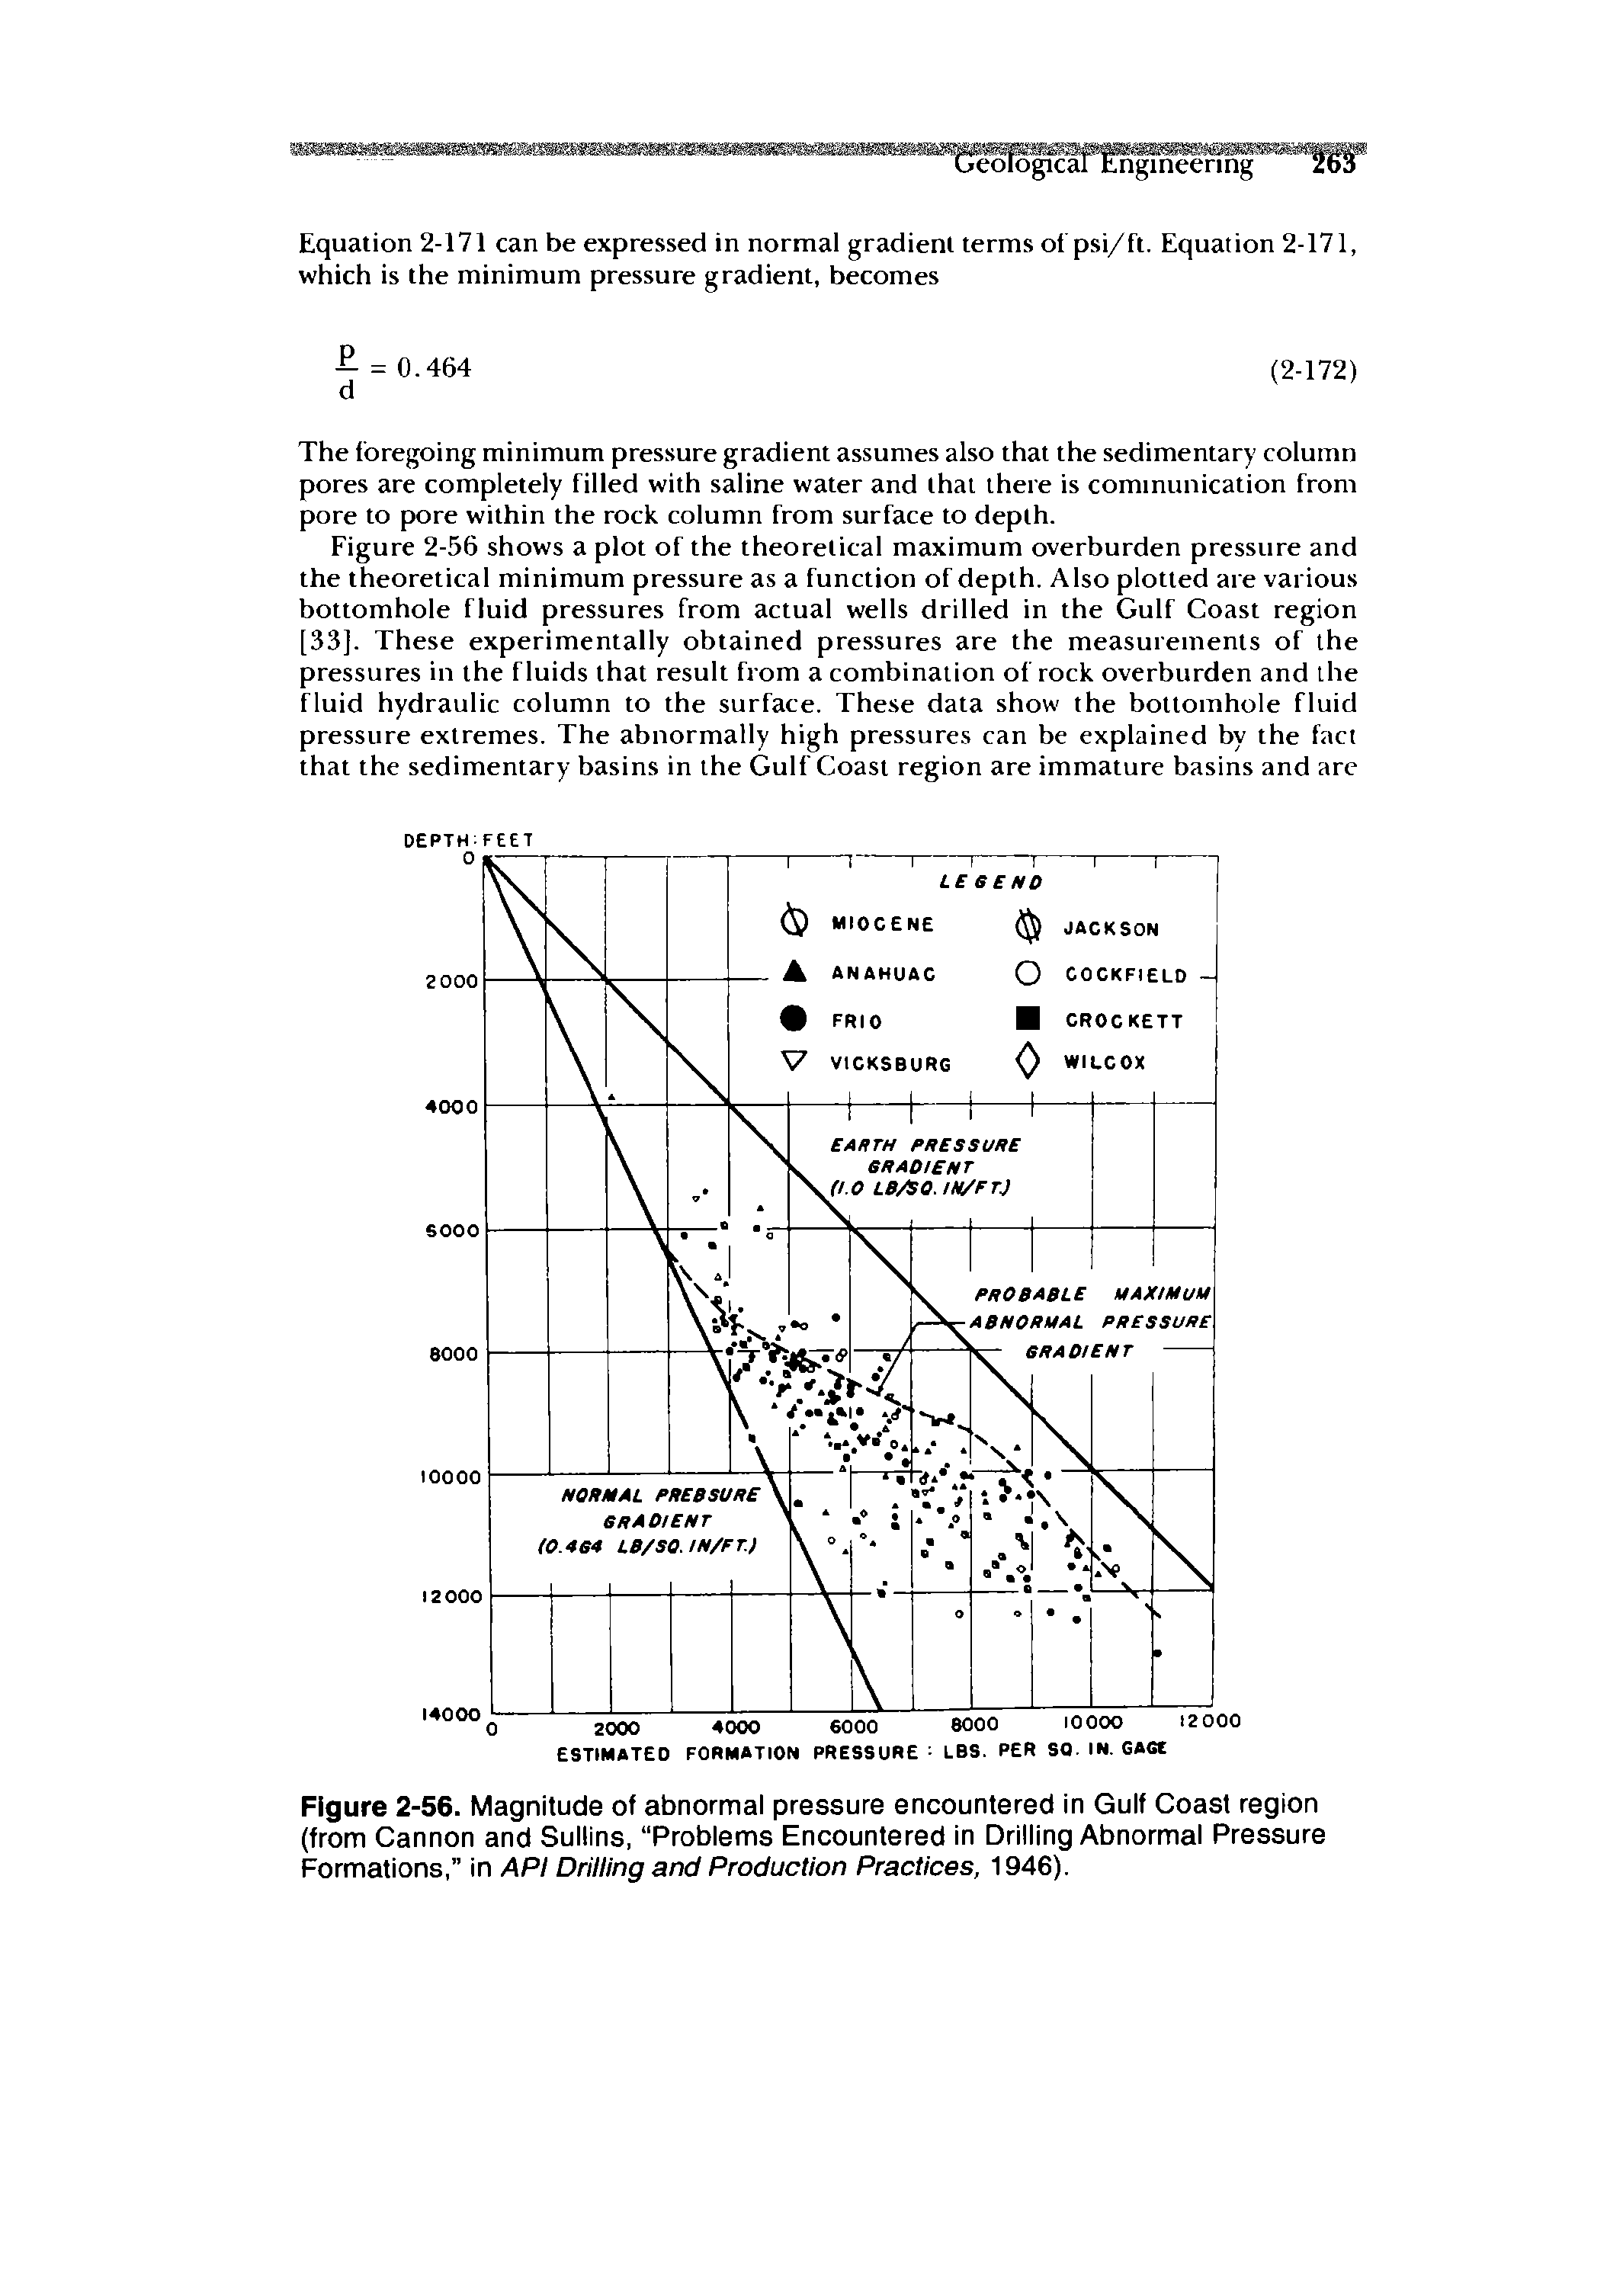 Figure 2-56. Magnitude of abnormal pressure encountered in Gulf Coast region (from Cannon and Sullins, Problems Encountered in Drilling Abnormal Pressure Formations, in API Drilling and Production Practices, 1946).